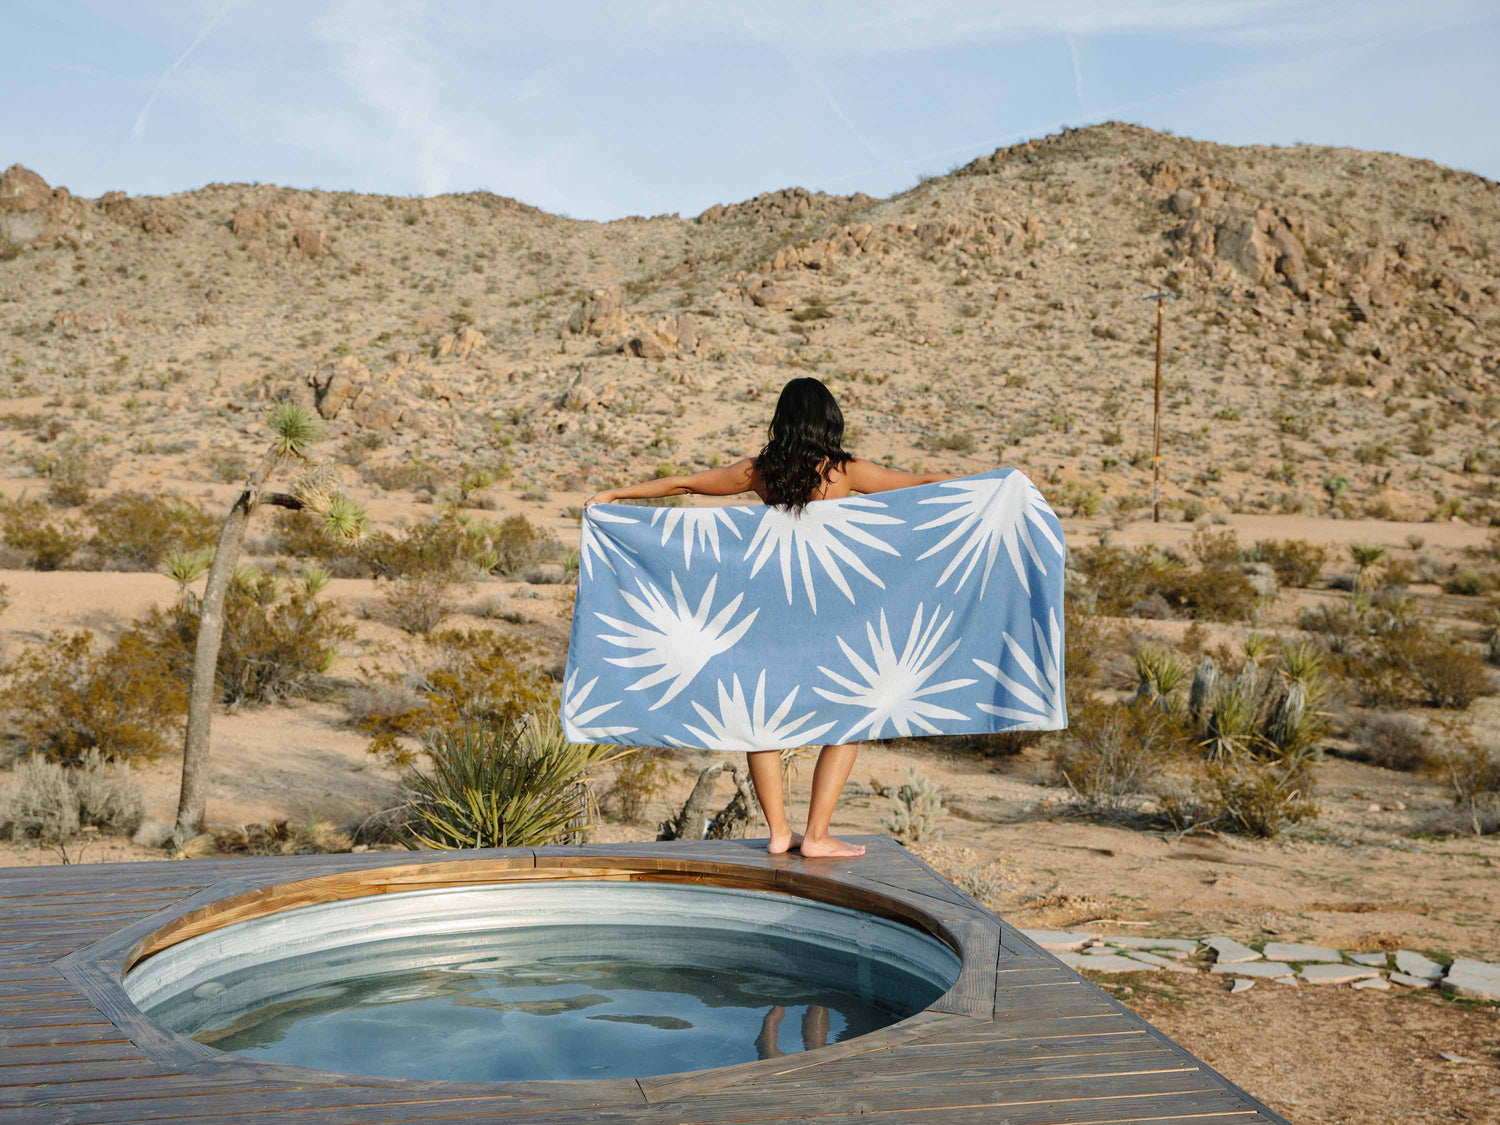 
      A woman standing beside a jacuzzi in the desert with her back turned, holding out a blue and white tropical patterned beach towel.
    